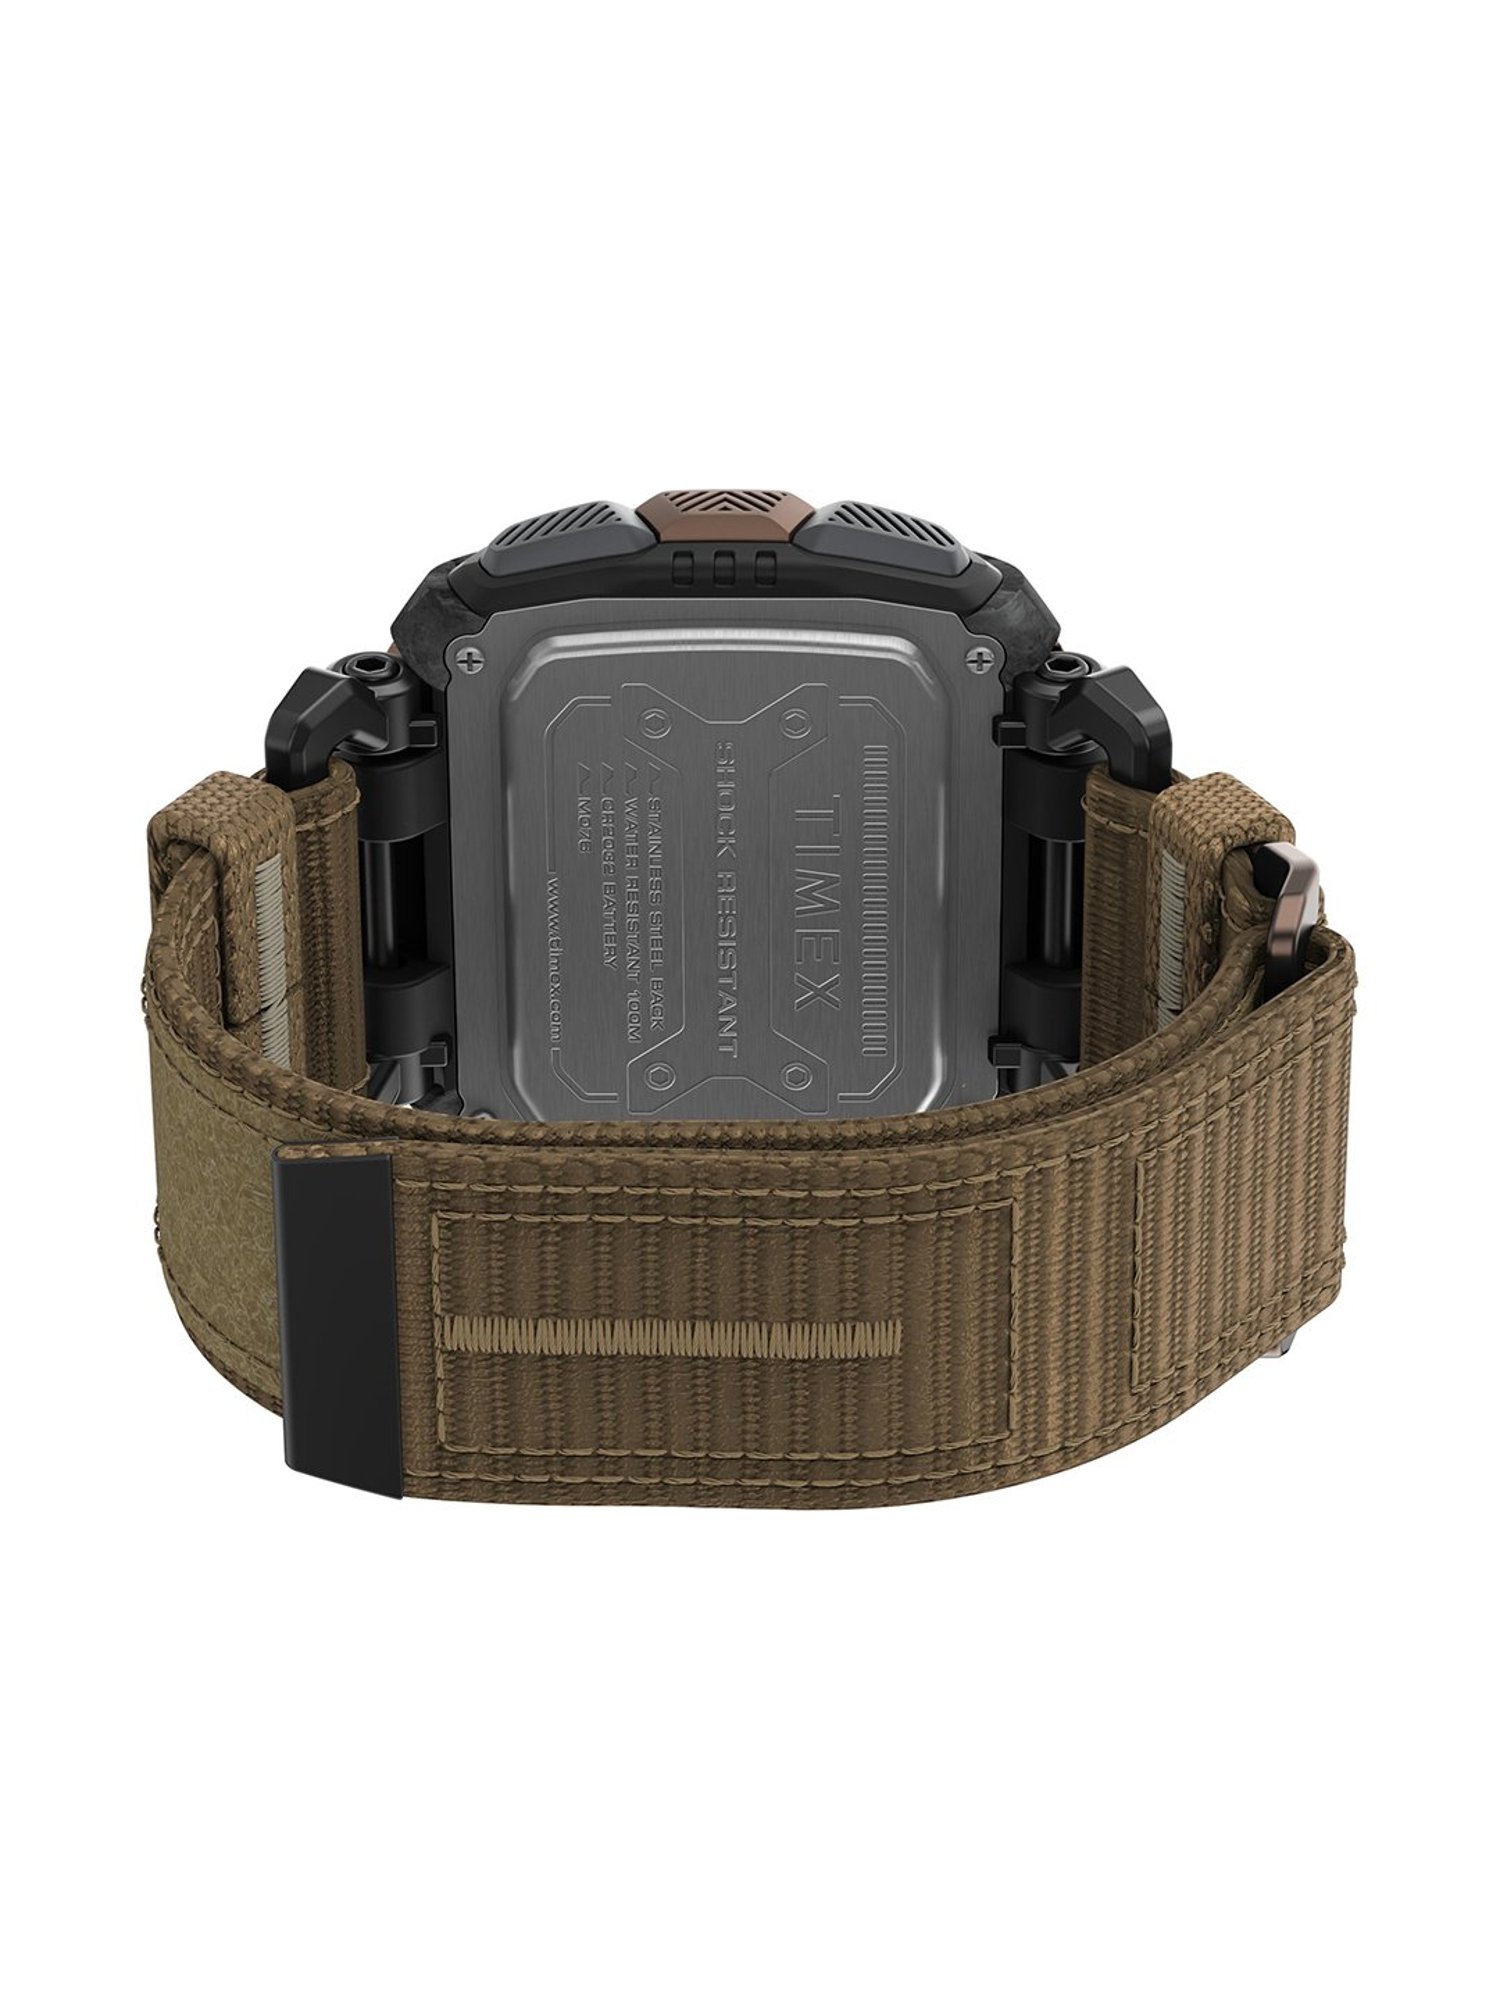 Expedition® CAT Midsize 34mm Fabric Strap Watch - TW4B28000 | Timex US